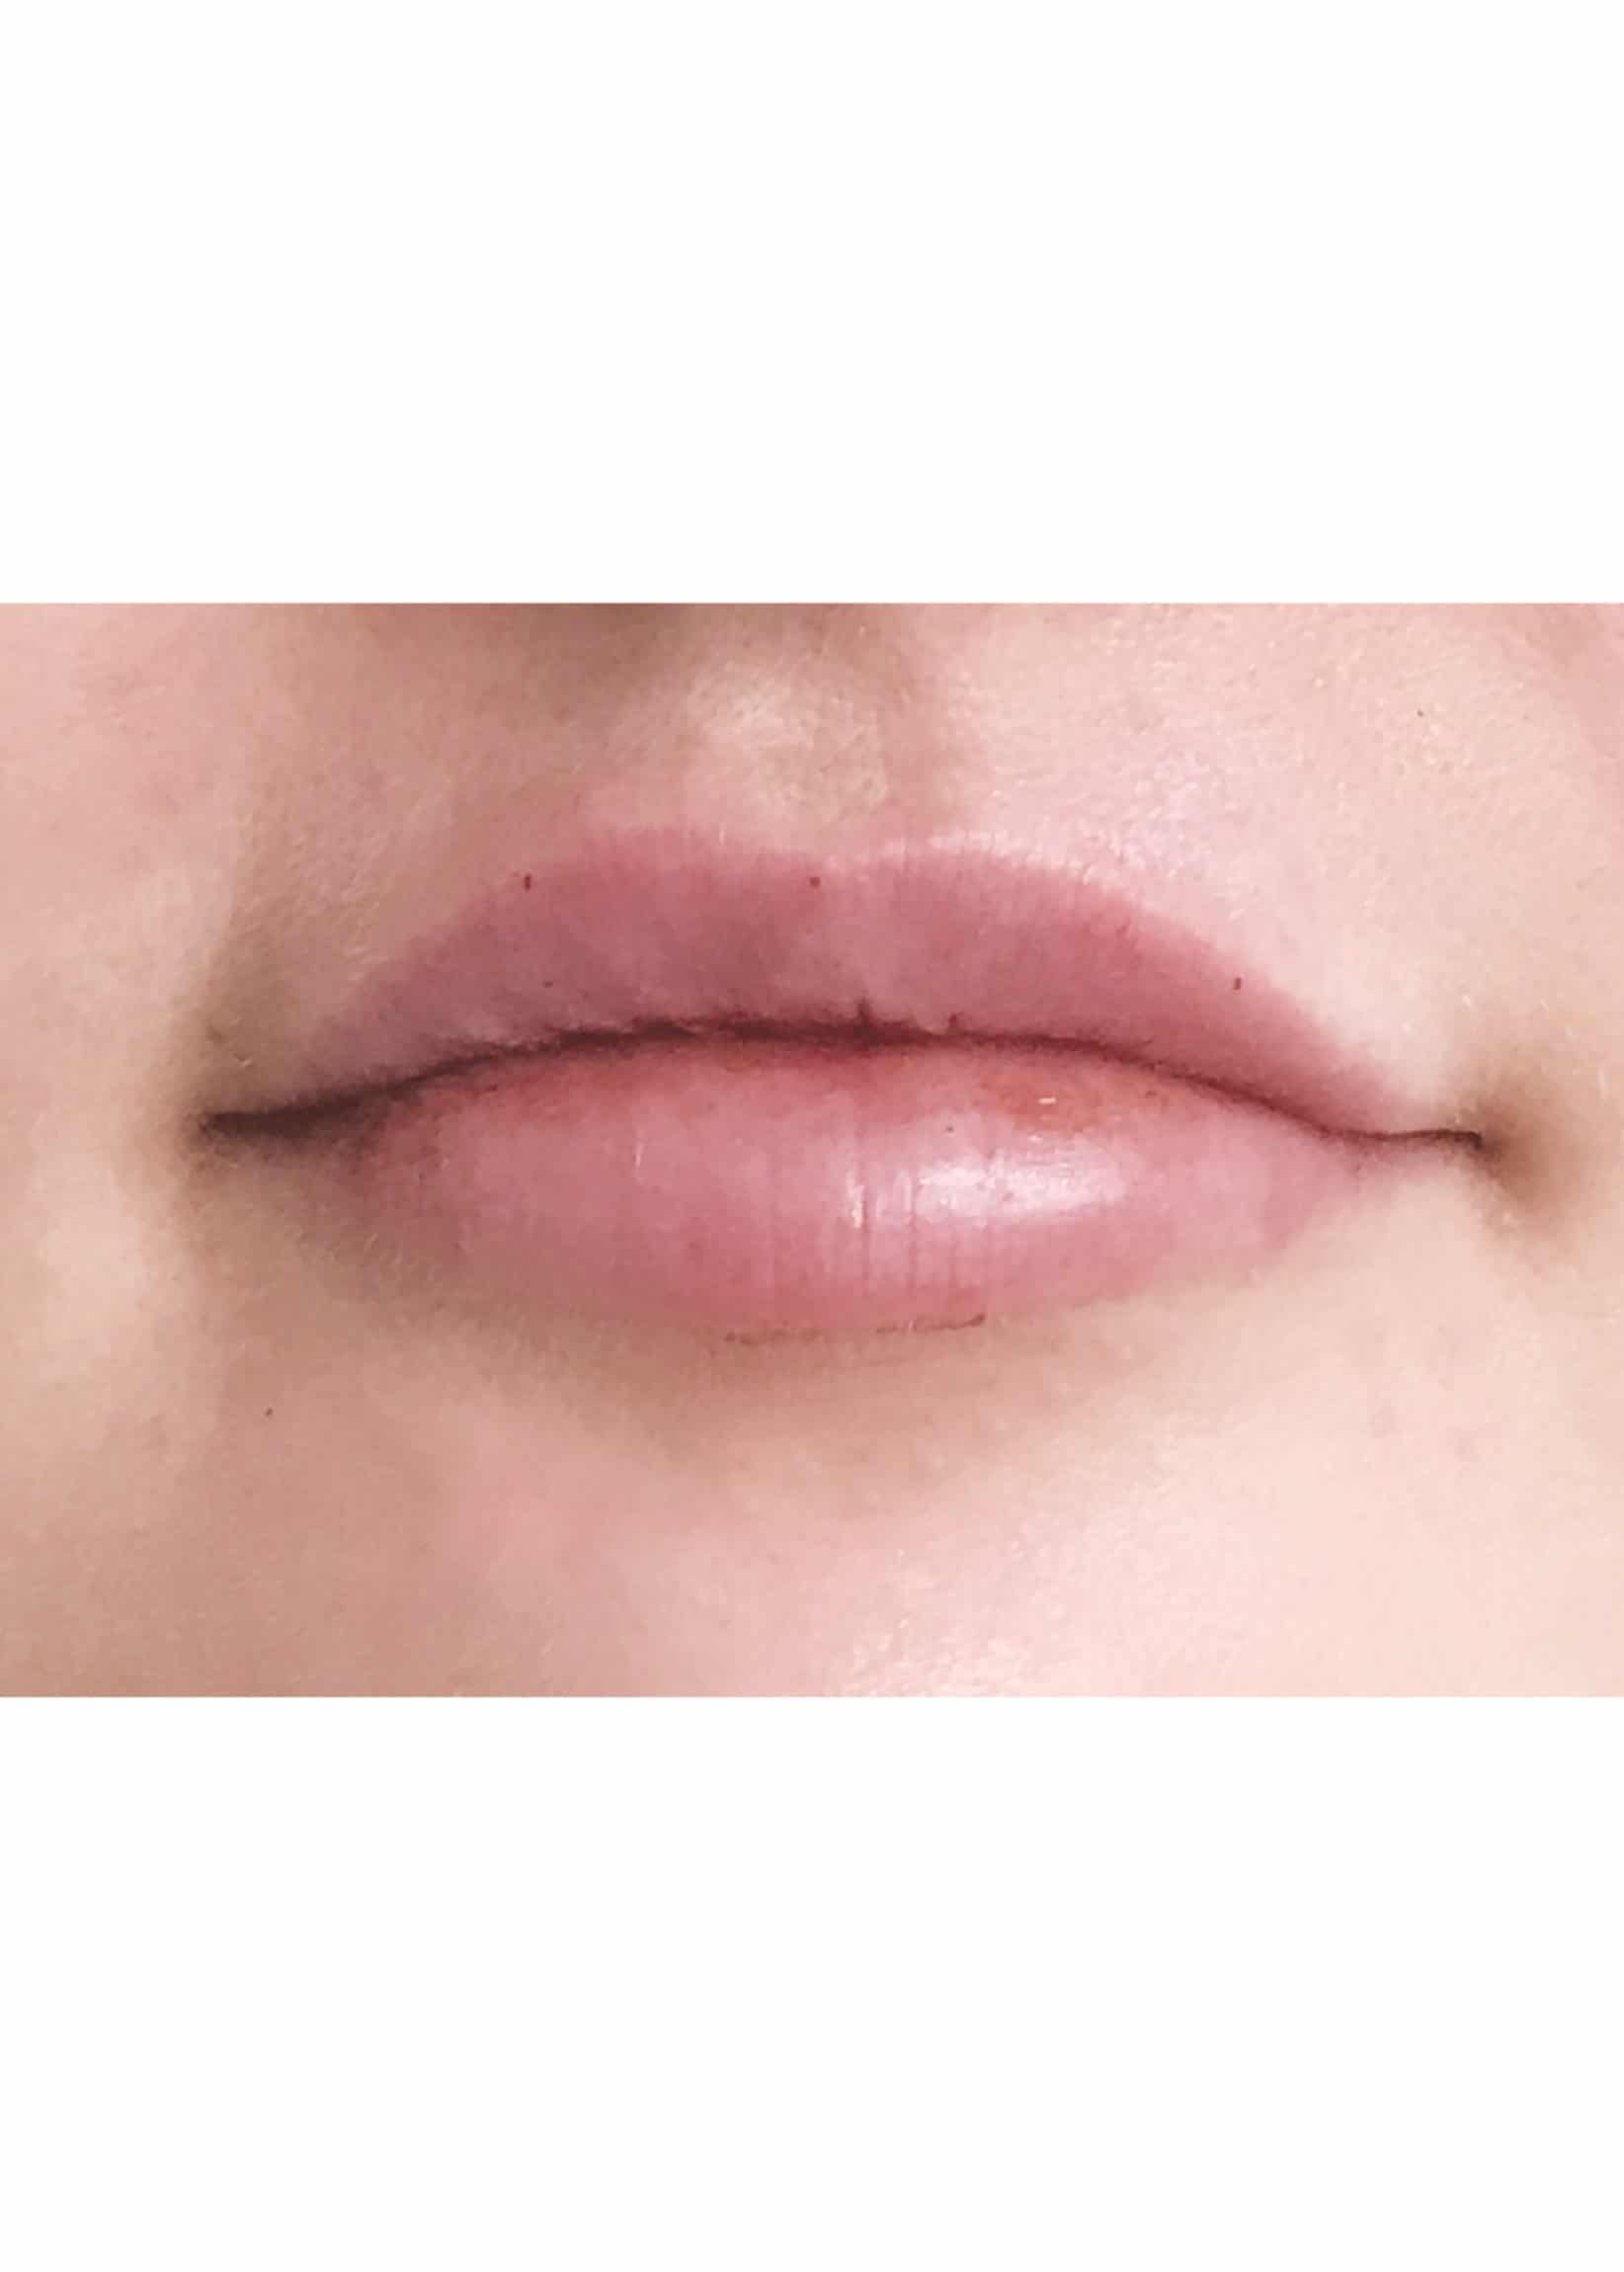 TheSkinCenter ProviderPages TiffaneyBeddow LipFiller After 4 scaled 1